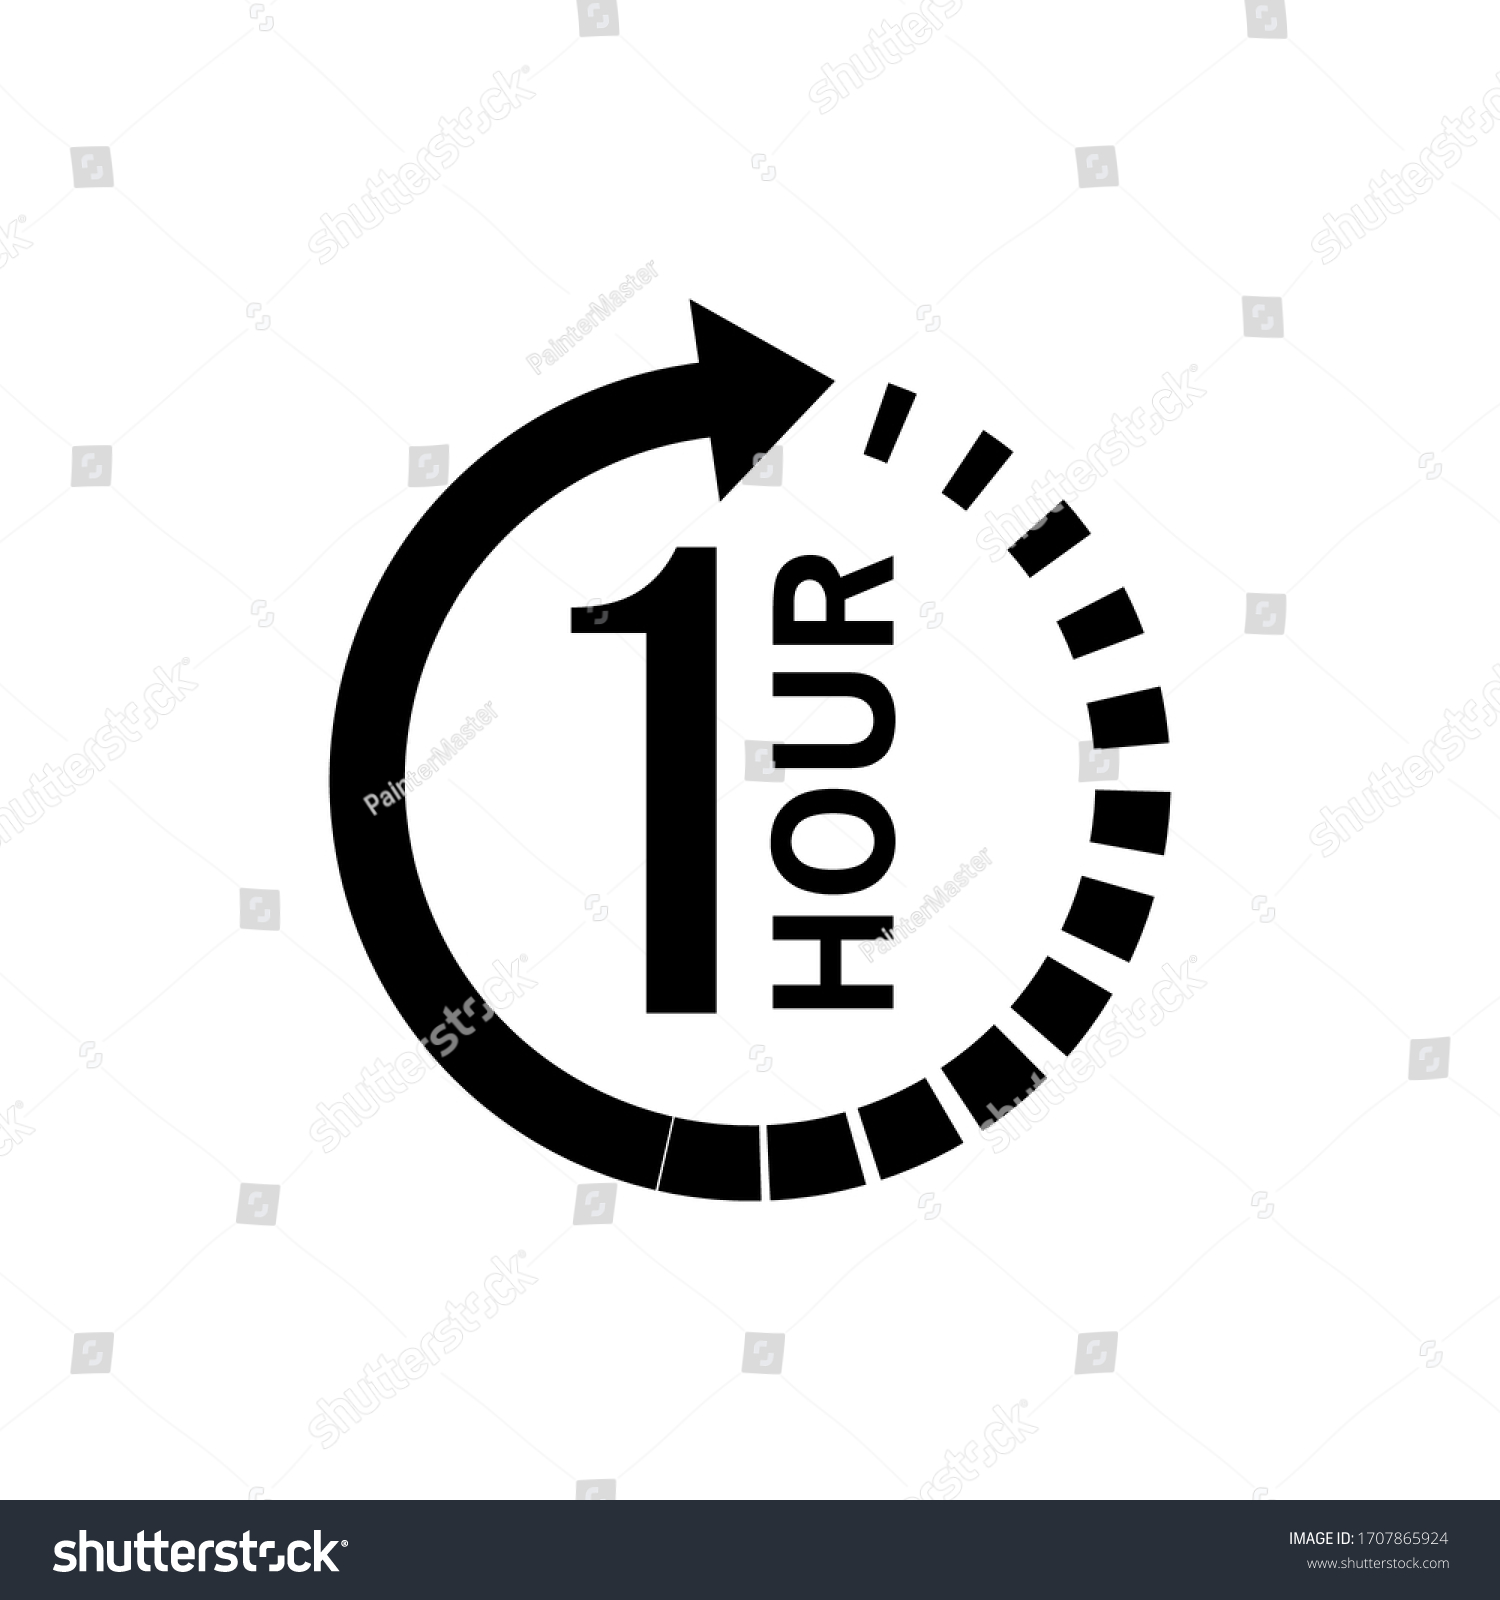 One hour arrow icon on white background. Stock vector #1707865924